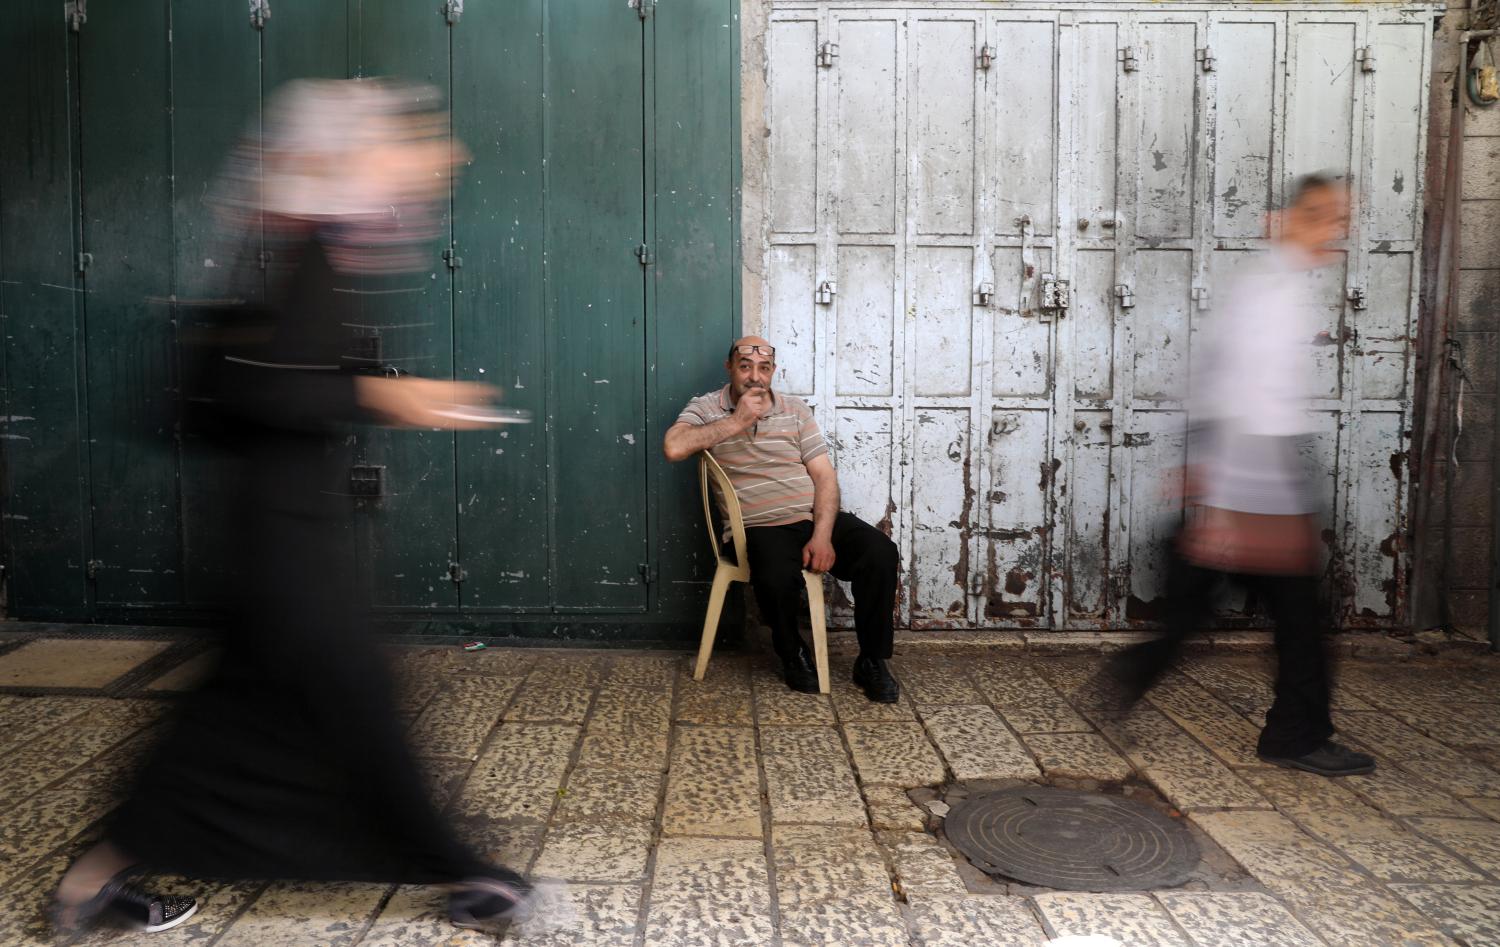 A man sits as people walk past closed shops during a general strike in solidarity with Palestinian prisoners on hunger strike in Israeli jails, in Jerusalem's Old City, April 27, 2017. REUTERS/Ammar Awad - RTS145IT